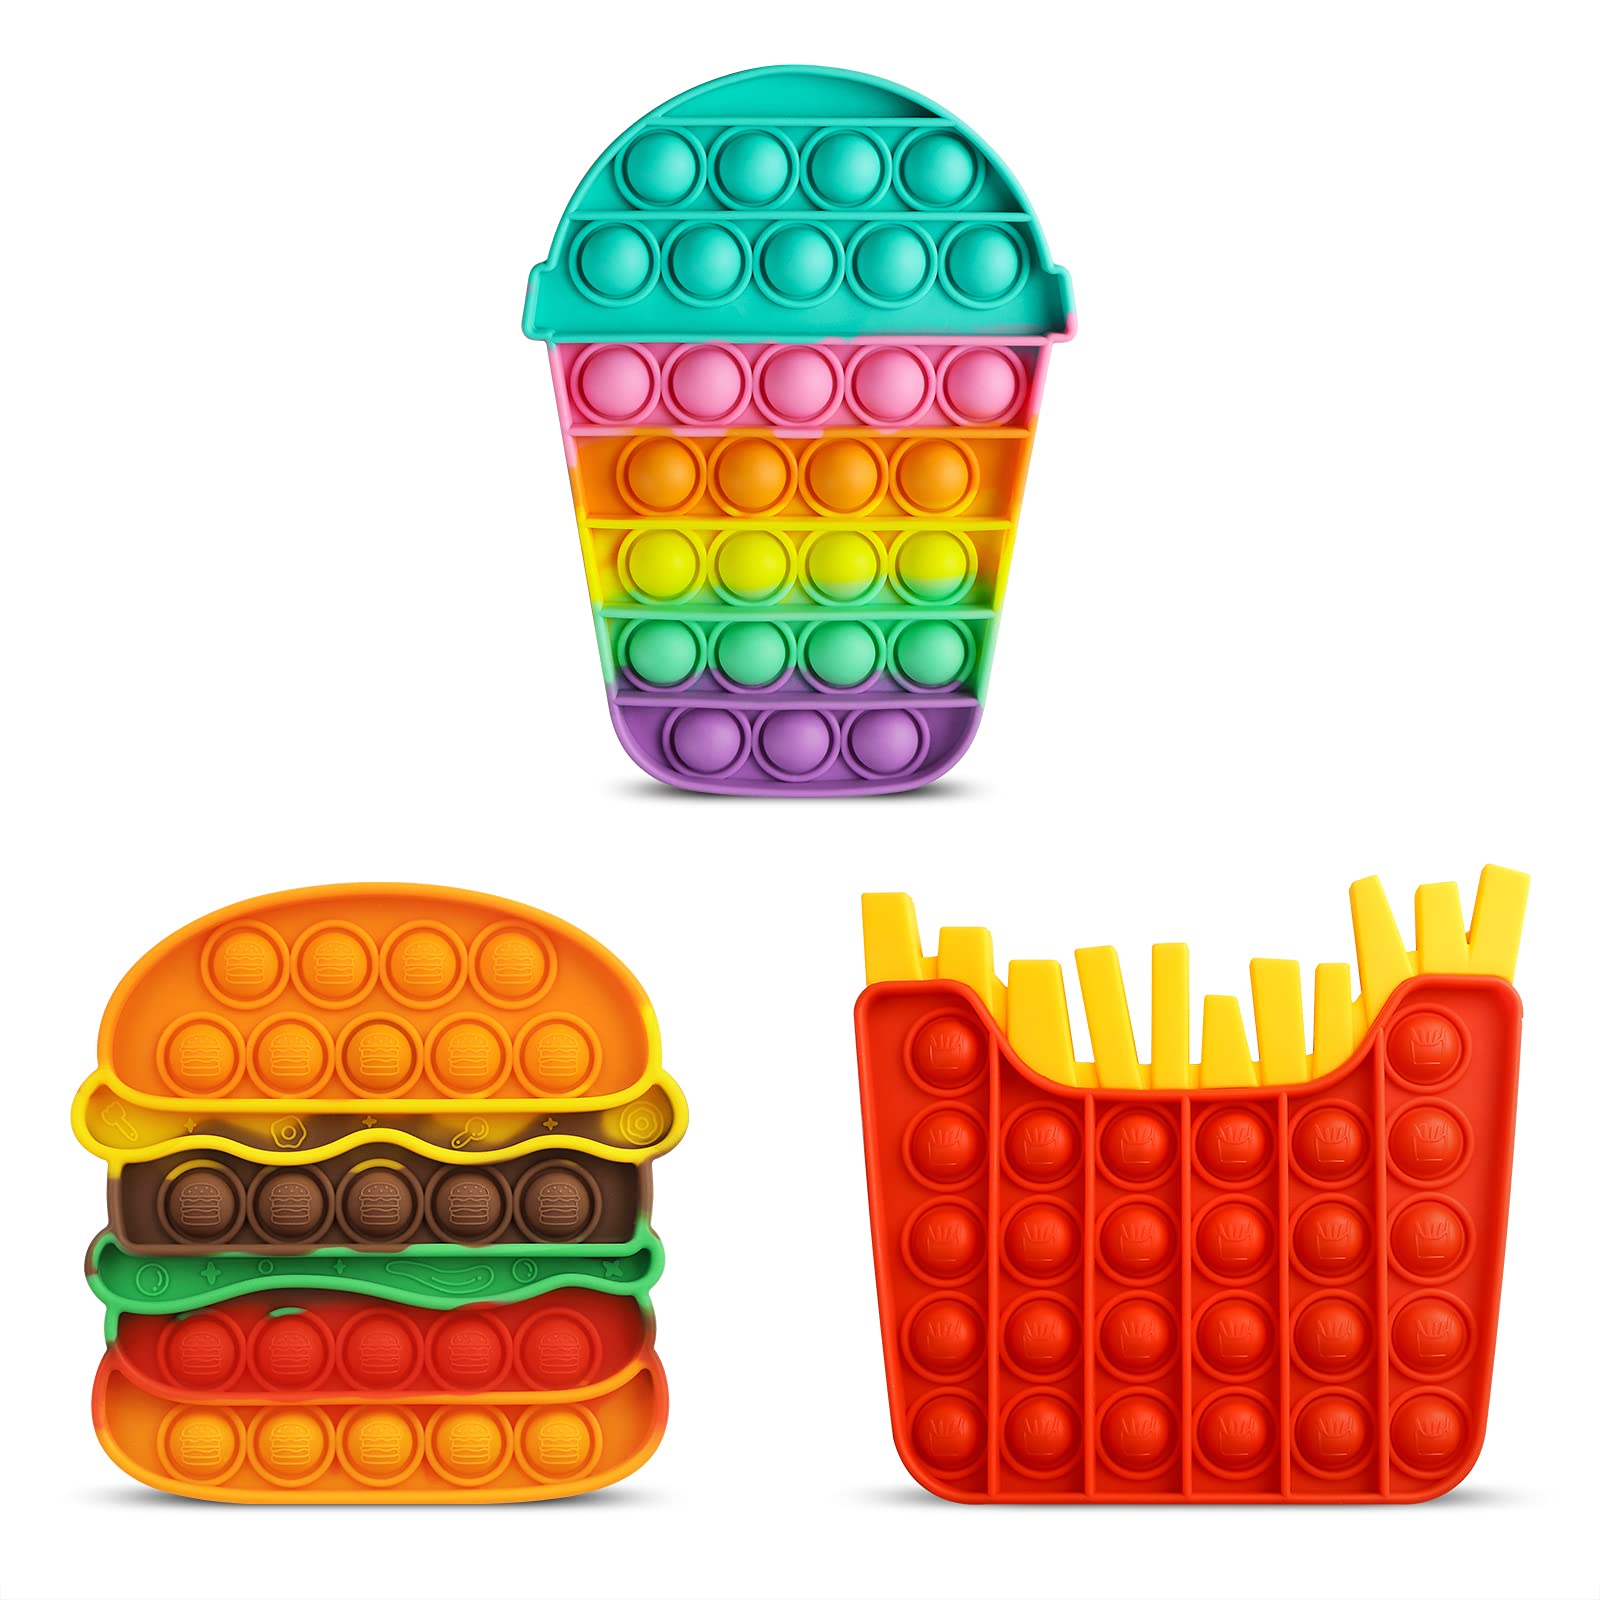 Aemotoy 3PCS Push Bubble Fidget Sensory Toys for Kids Adults Silicone Pop Rainbow Hamburger Squeeze Toy Stress Anxiety Relief Toys Novelty Gift for Autism ADD ADHD,Colorful Hamburger+Fries+Cup